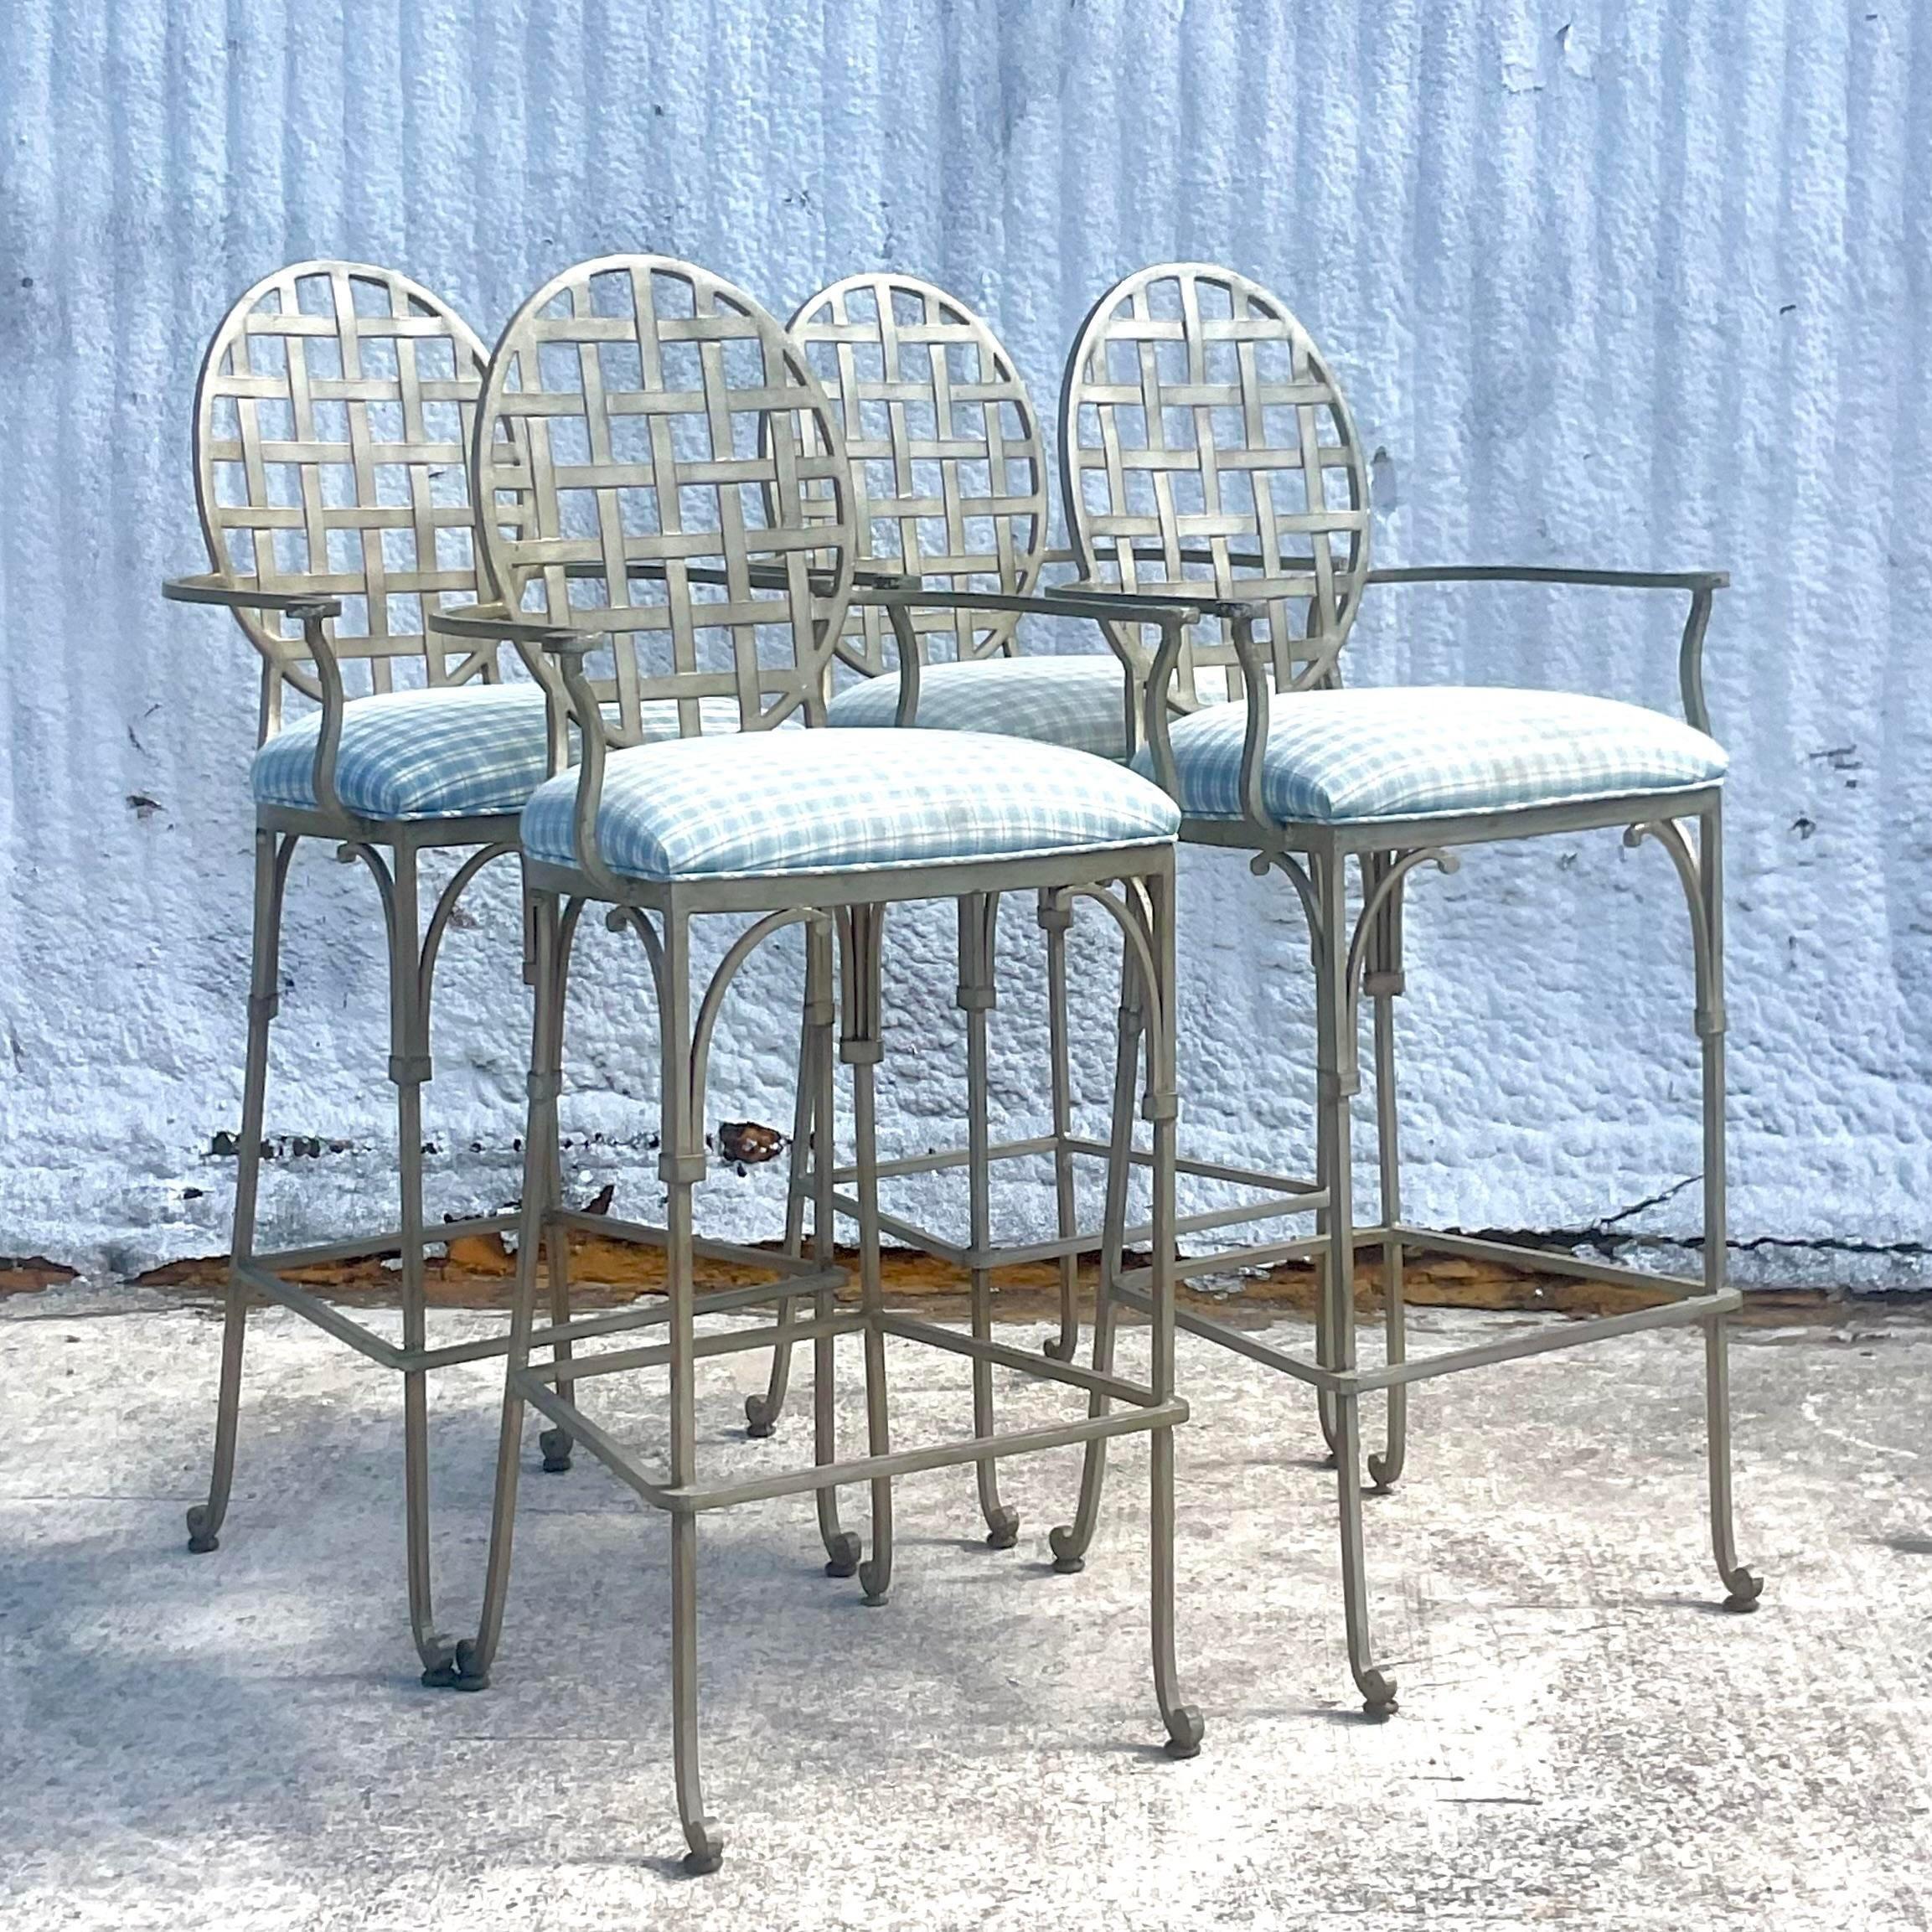 A fantastic set of four vintage Coastal barstools. A chic brushed wrought iron with a charming trellis design. Tall and sturdy. Acquired from a Palm Beach estate.